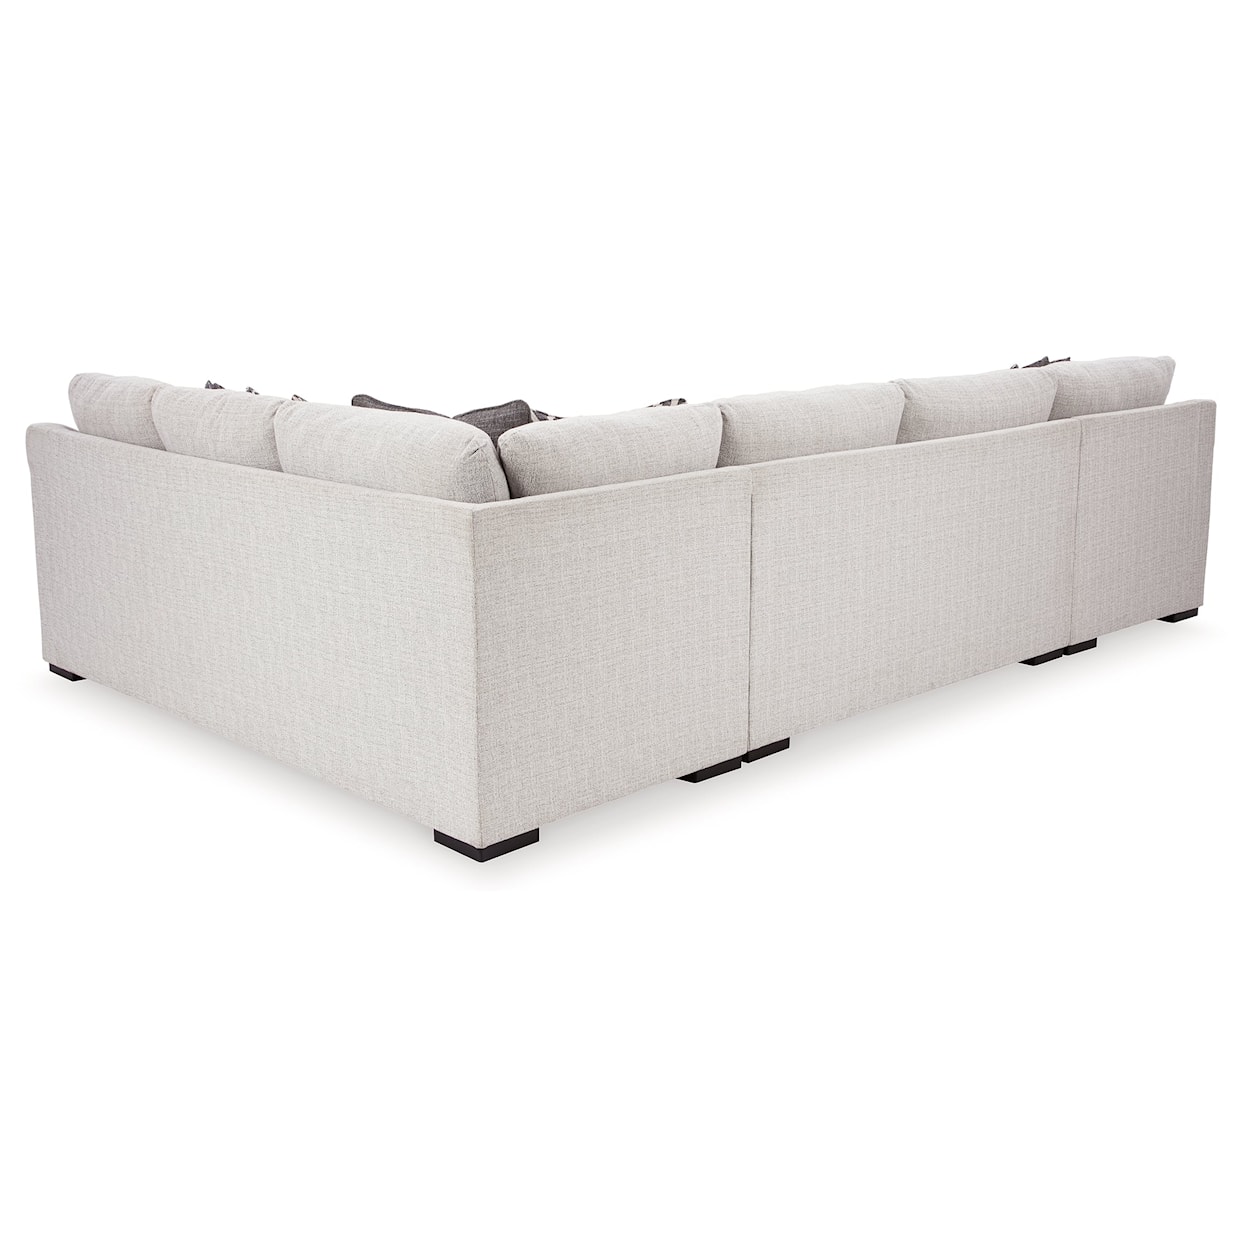 Benchcraft by Ashley Koralynn 3-Piece Sectional With Chaise